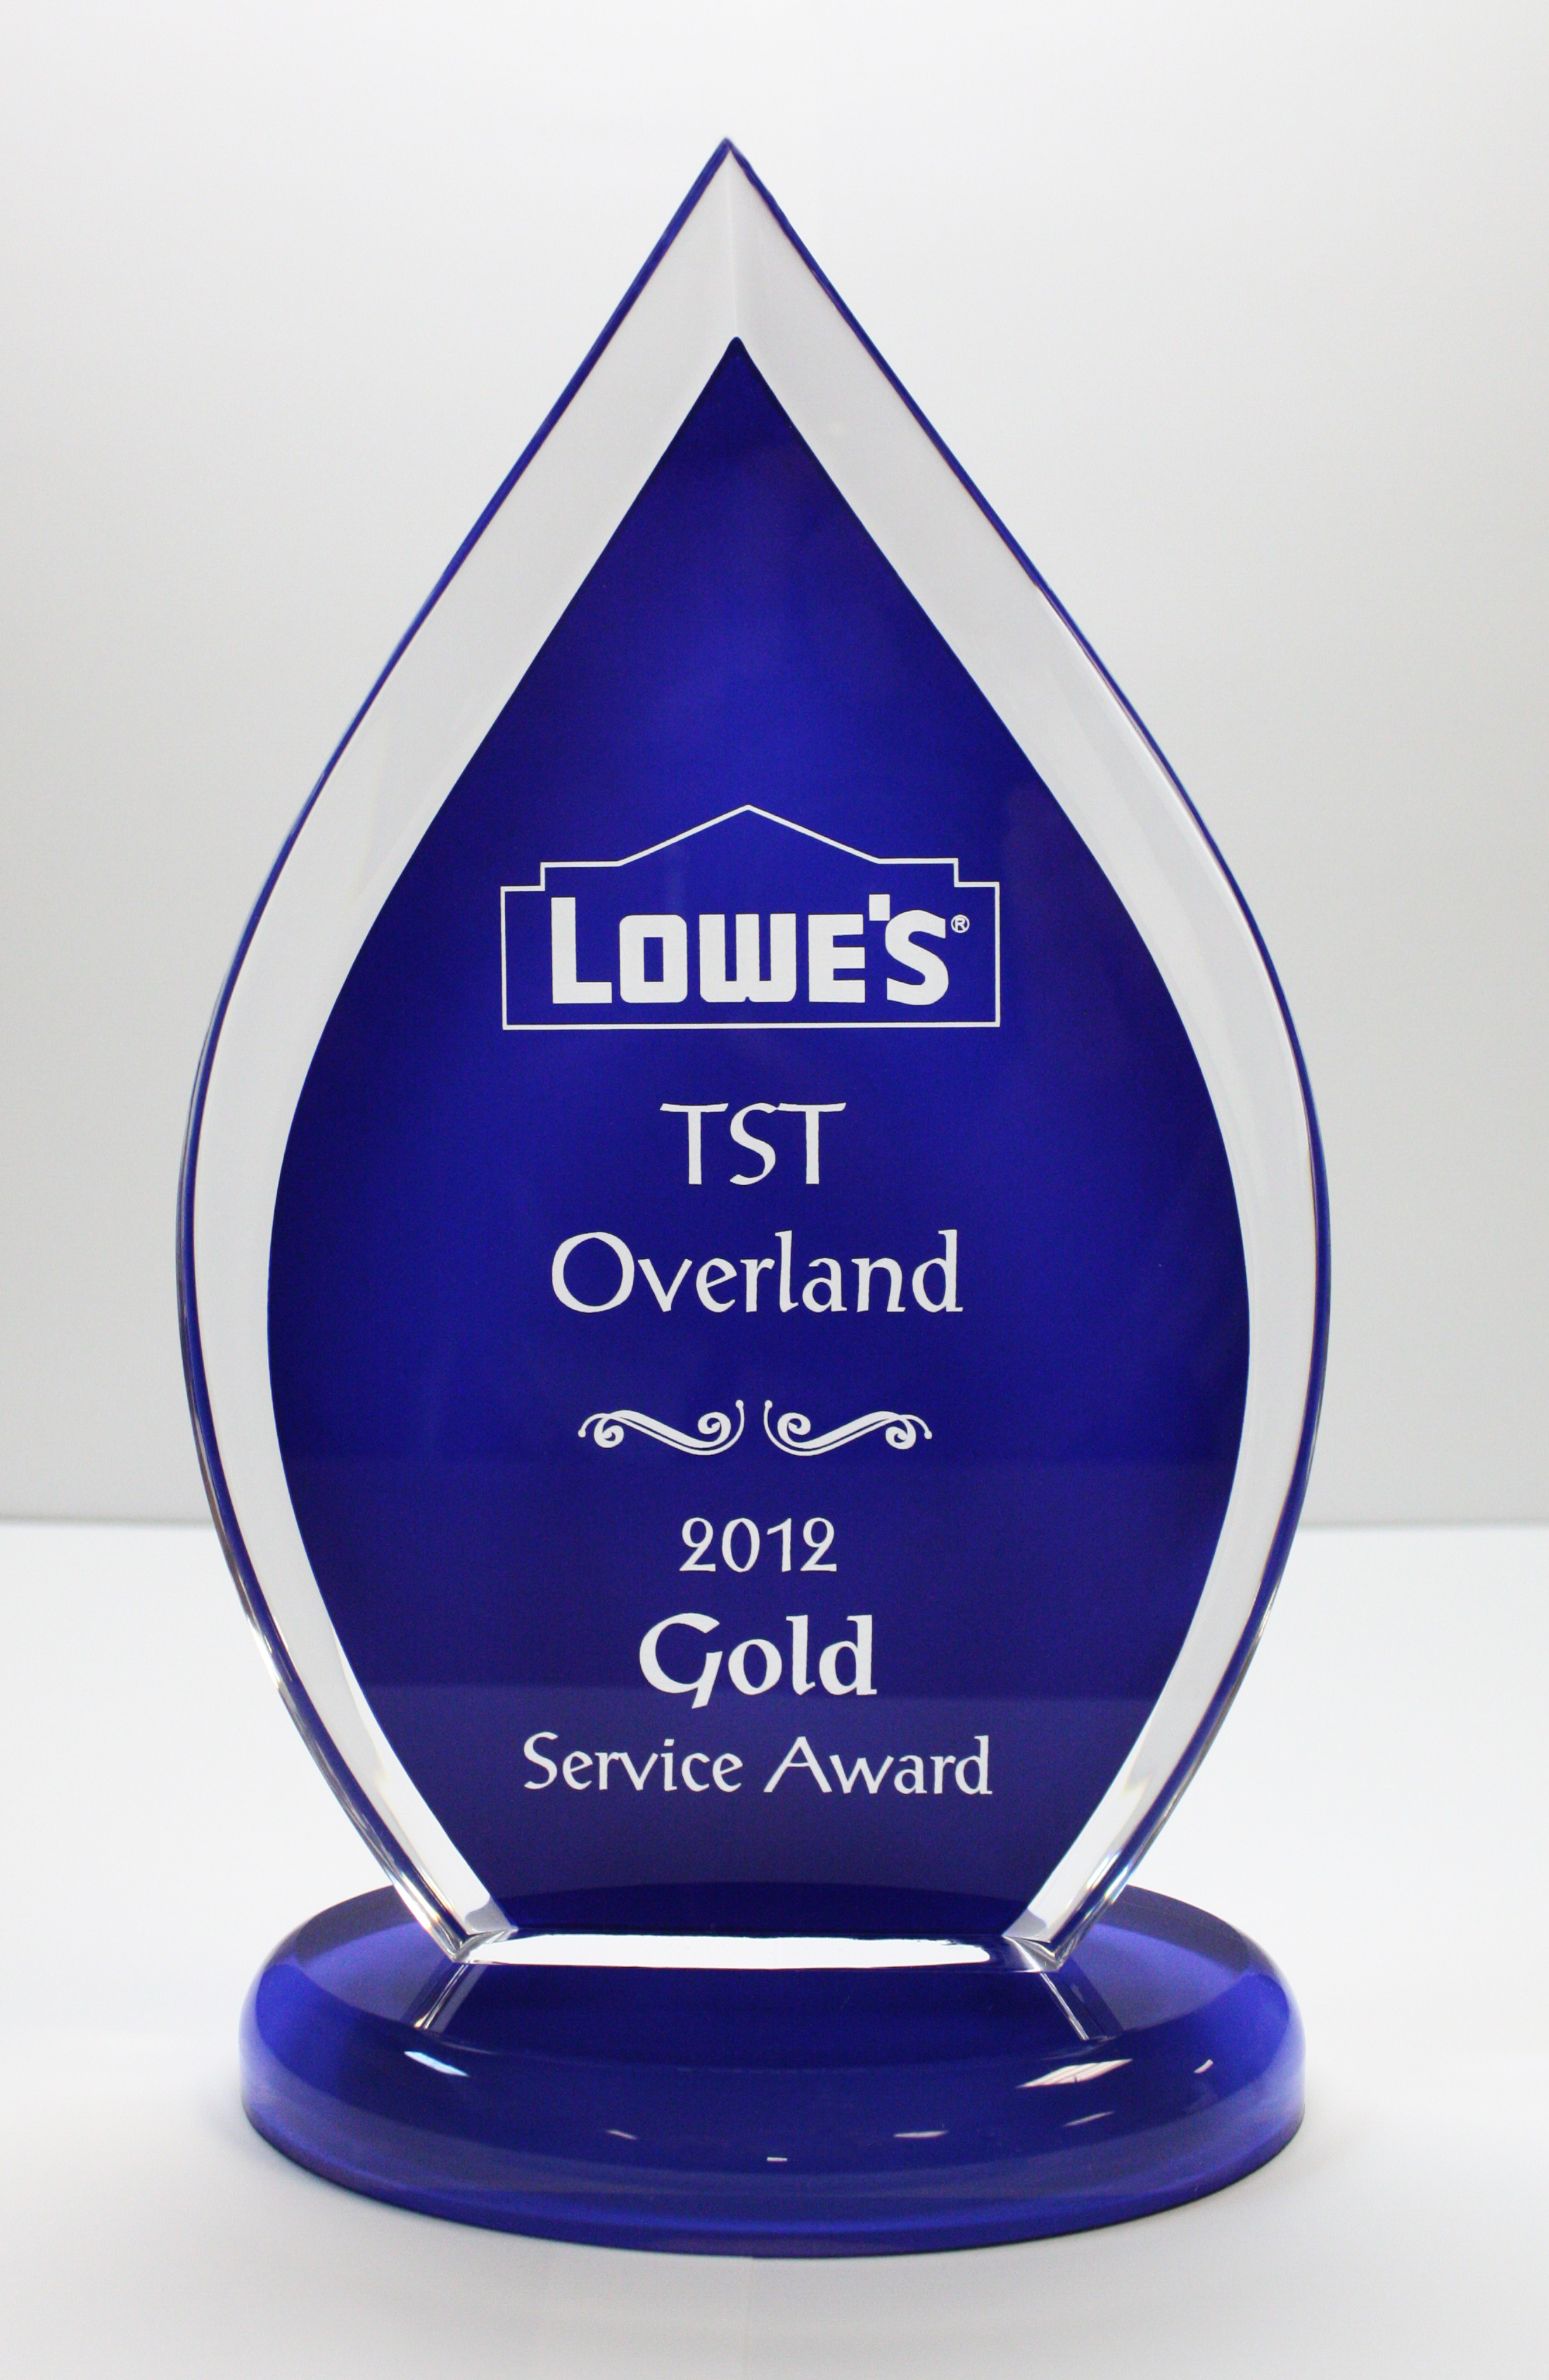 TST Overland Express gets top honors for service excellence